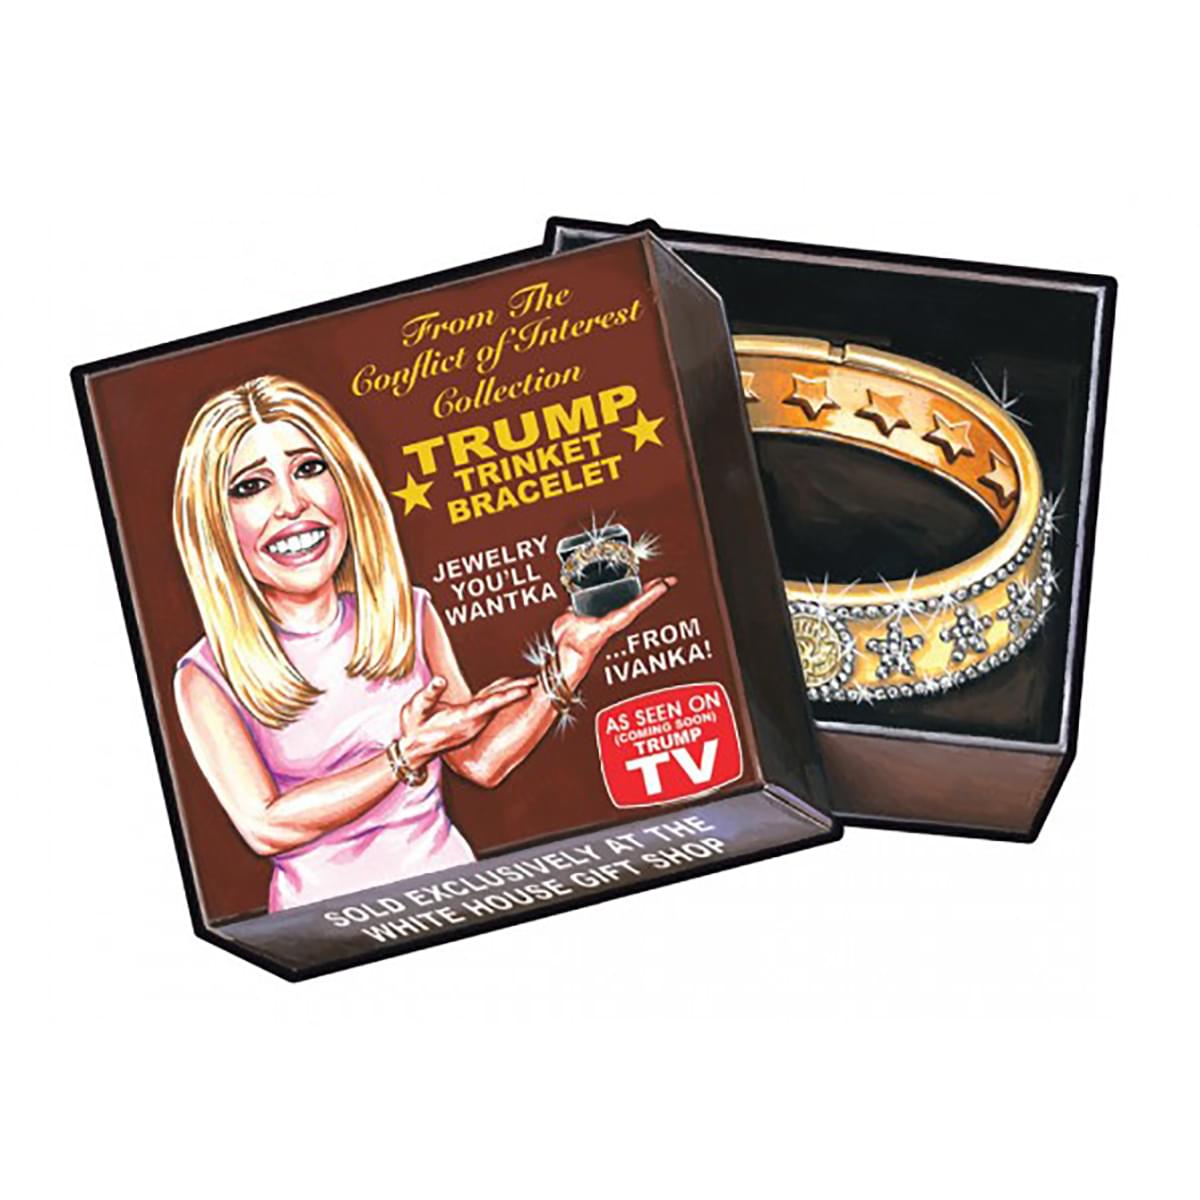 GPK: Disgrace To The White House: Jewelry You'll Wantka From Ivanka, Card 82